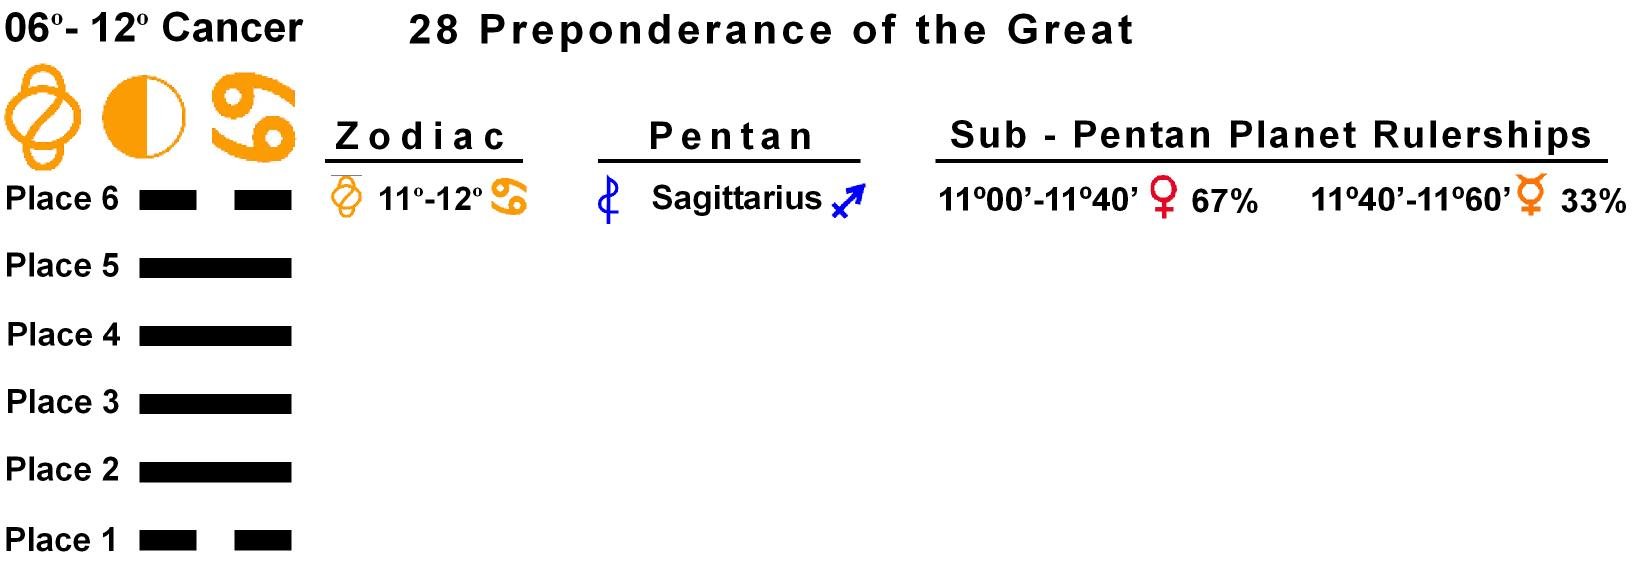 Pent-lines-04CA 11-12 Hx-28 Preponderance Of The Great